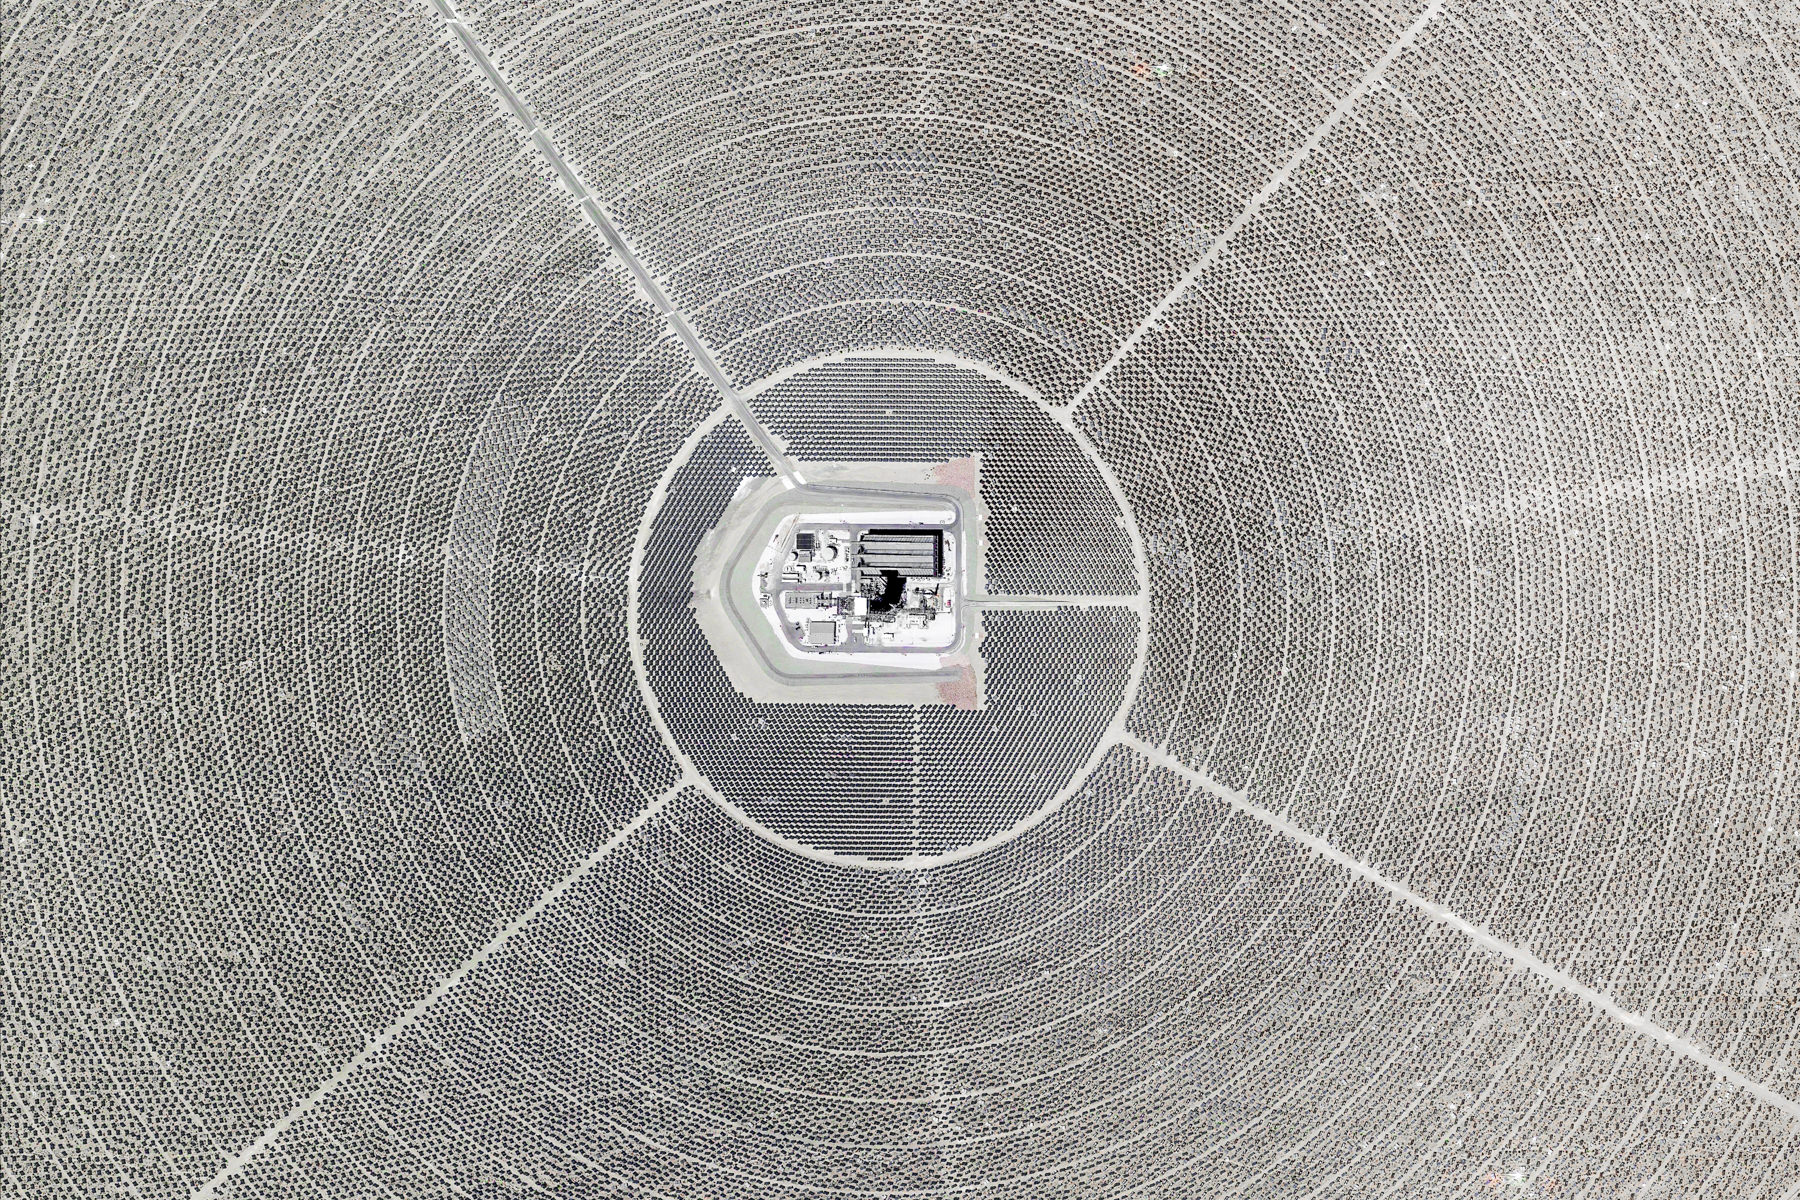 concentrated solar power tower